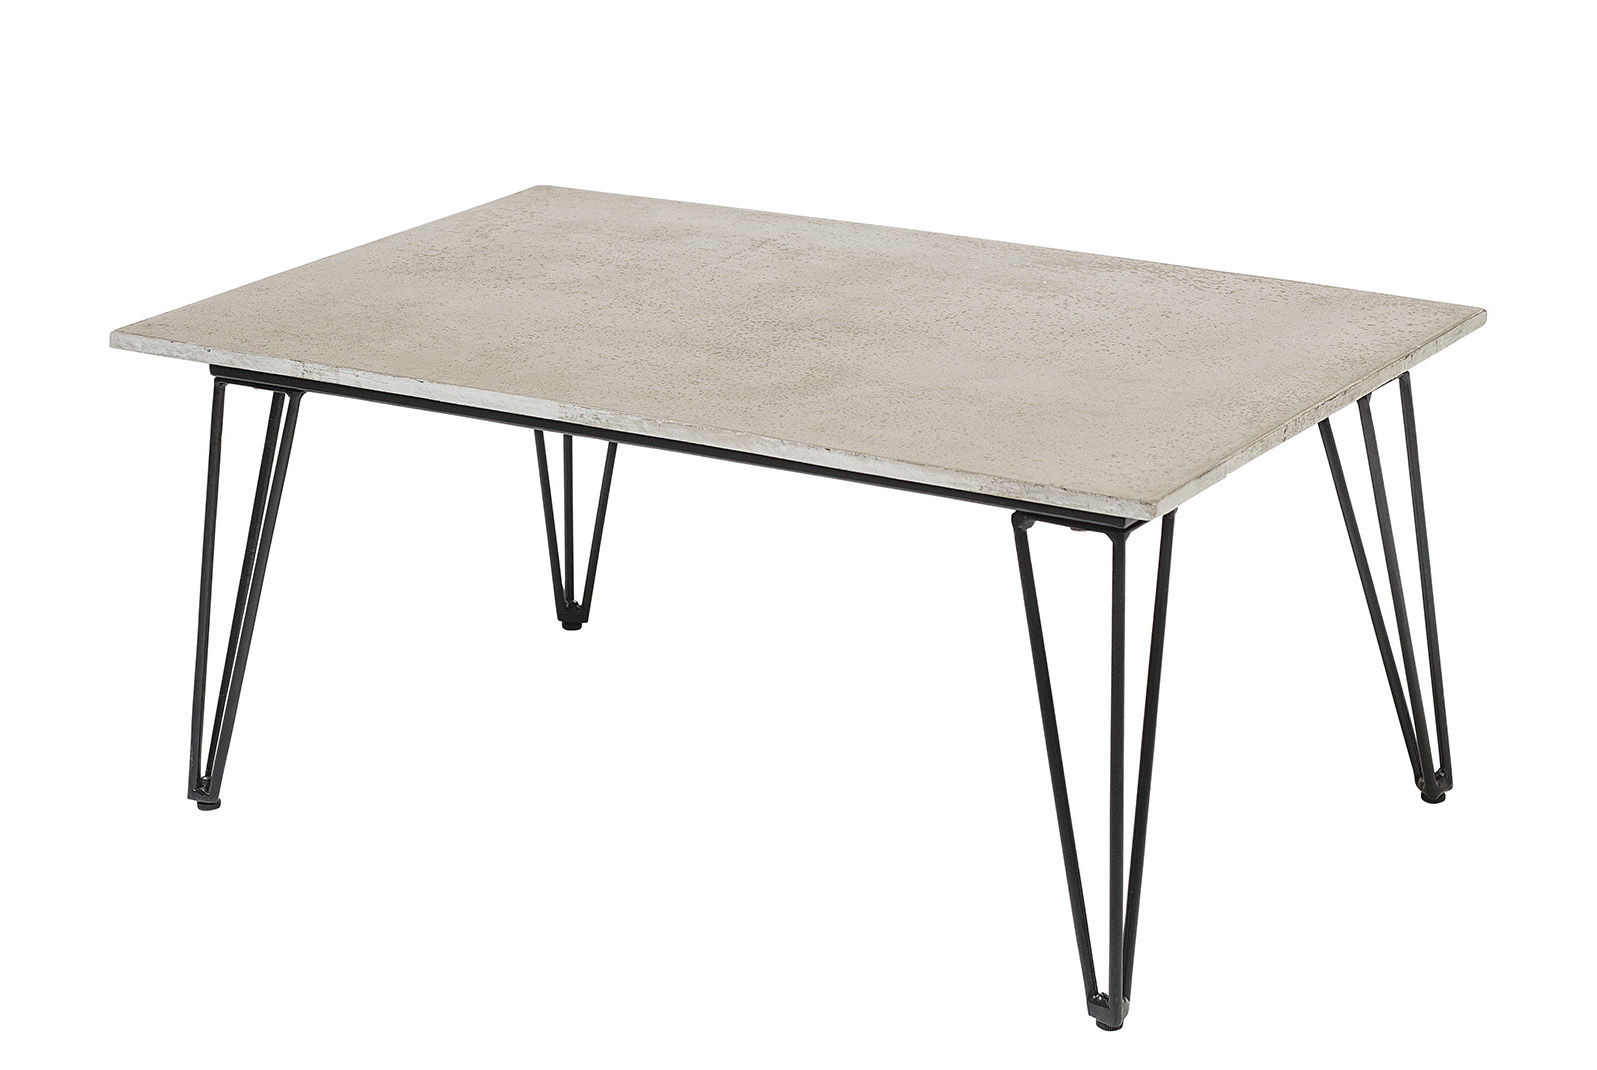 Bloomingville Concrete Coffee table - Grey | Made In Design UK